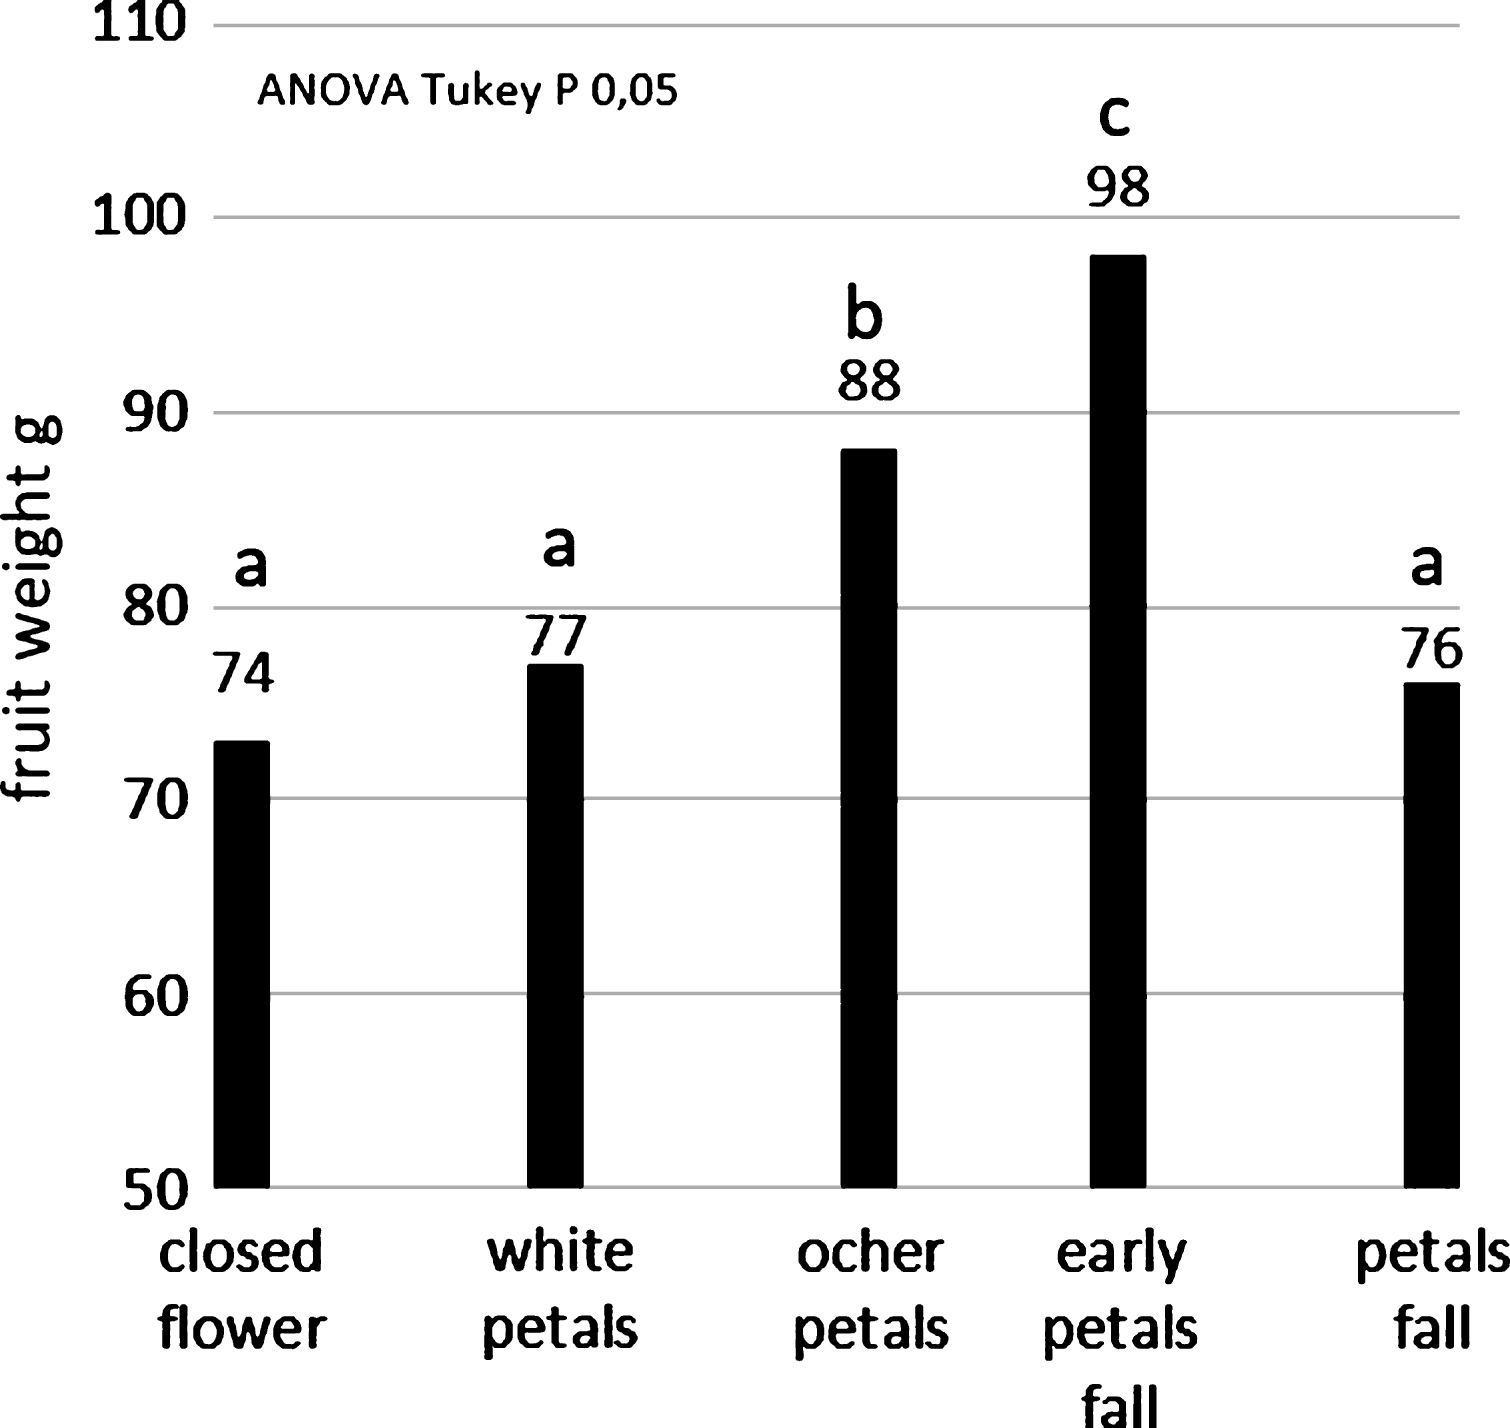 Average weights of the fruit pollinated by liquid pollination system, clustered according their flowering stage during pollination.